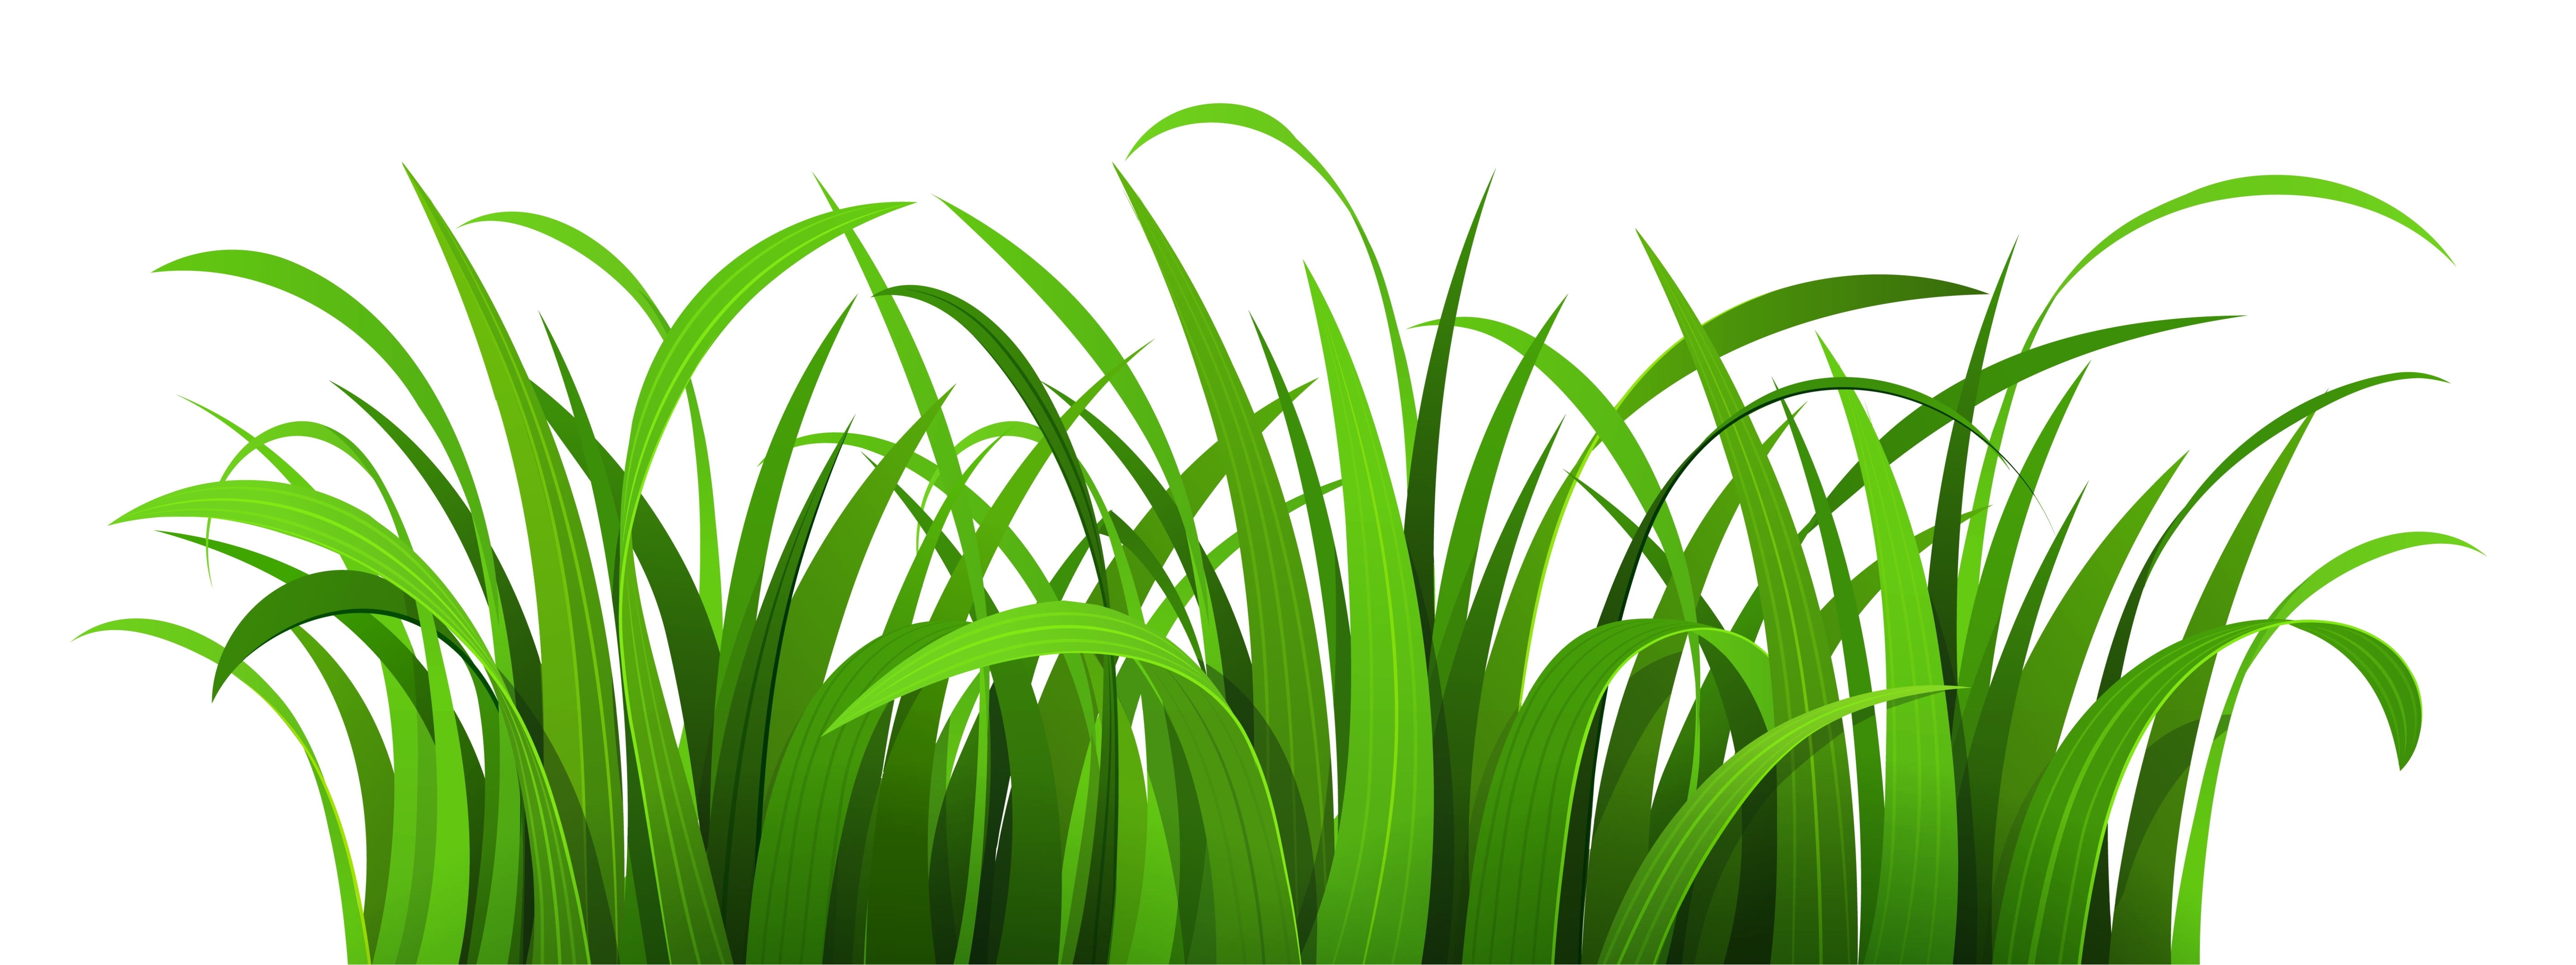 grass-outline-free-download-on-clipartmag